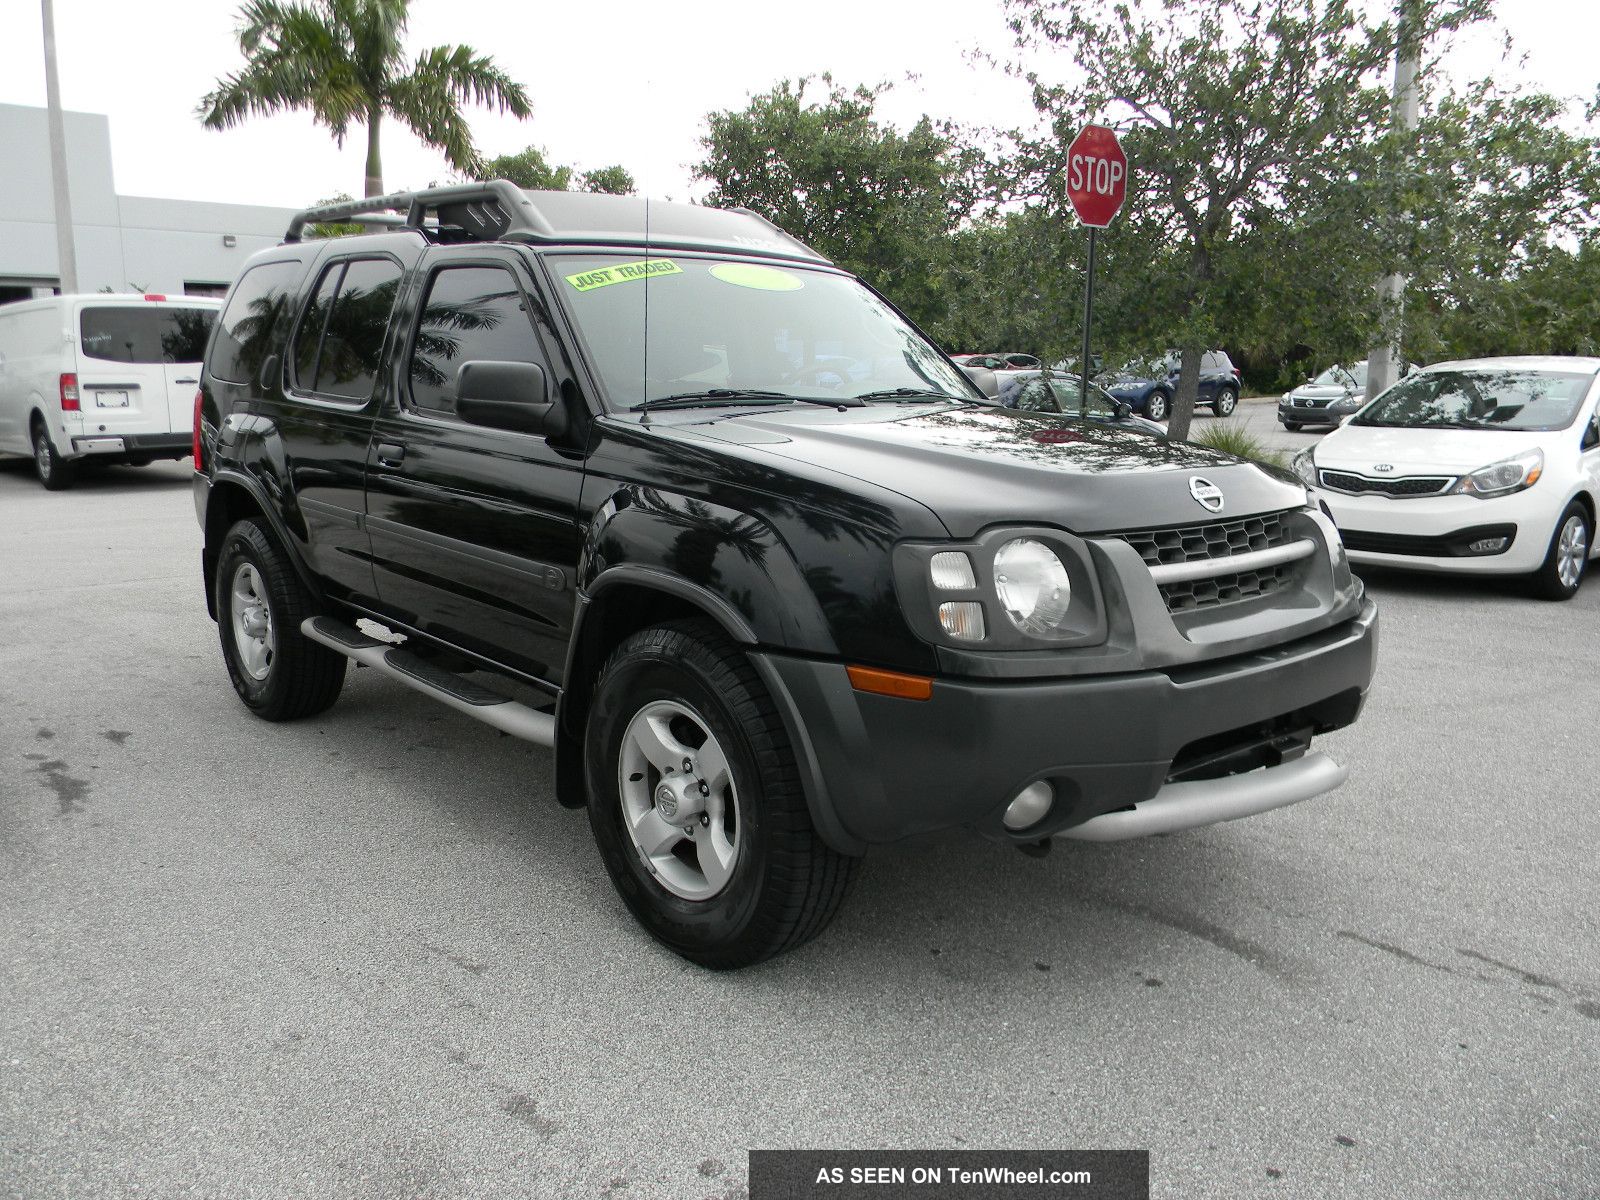 Looking for 2004 more nissan xterra sport utility vehicles #3